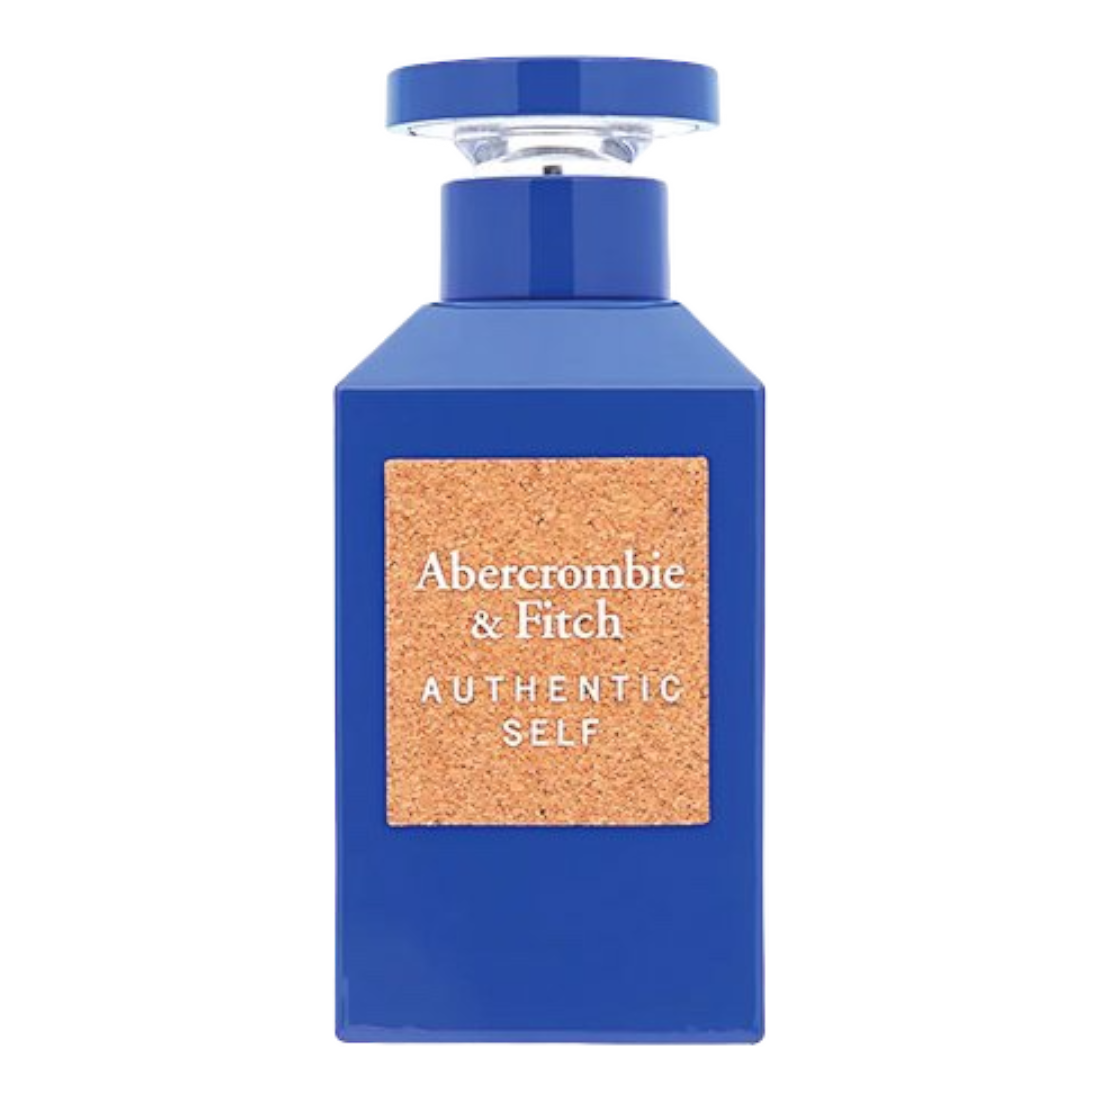 ABERCROMBIEFITCH AUTHENTIC SELF UOMO EDT 100ML TESTER